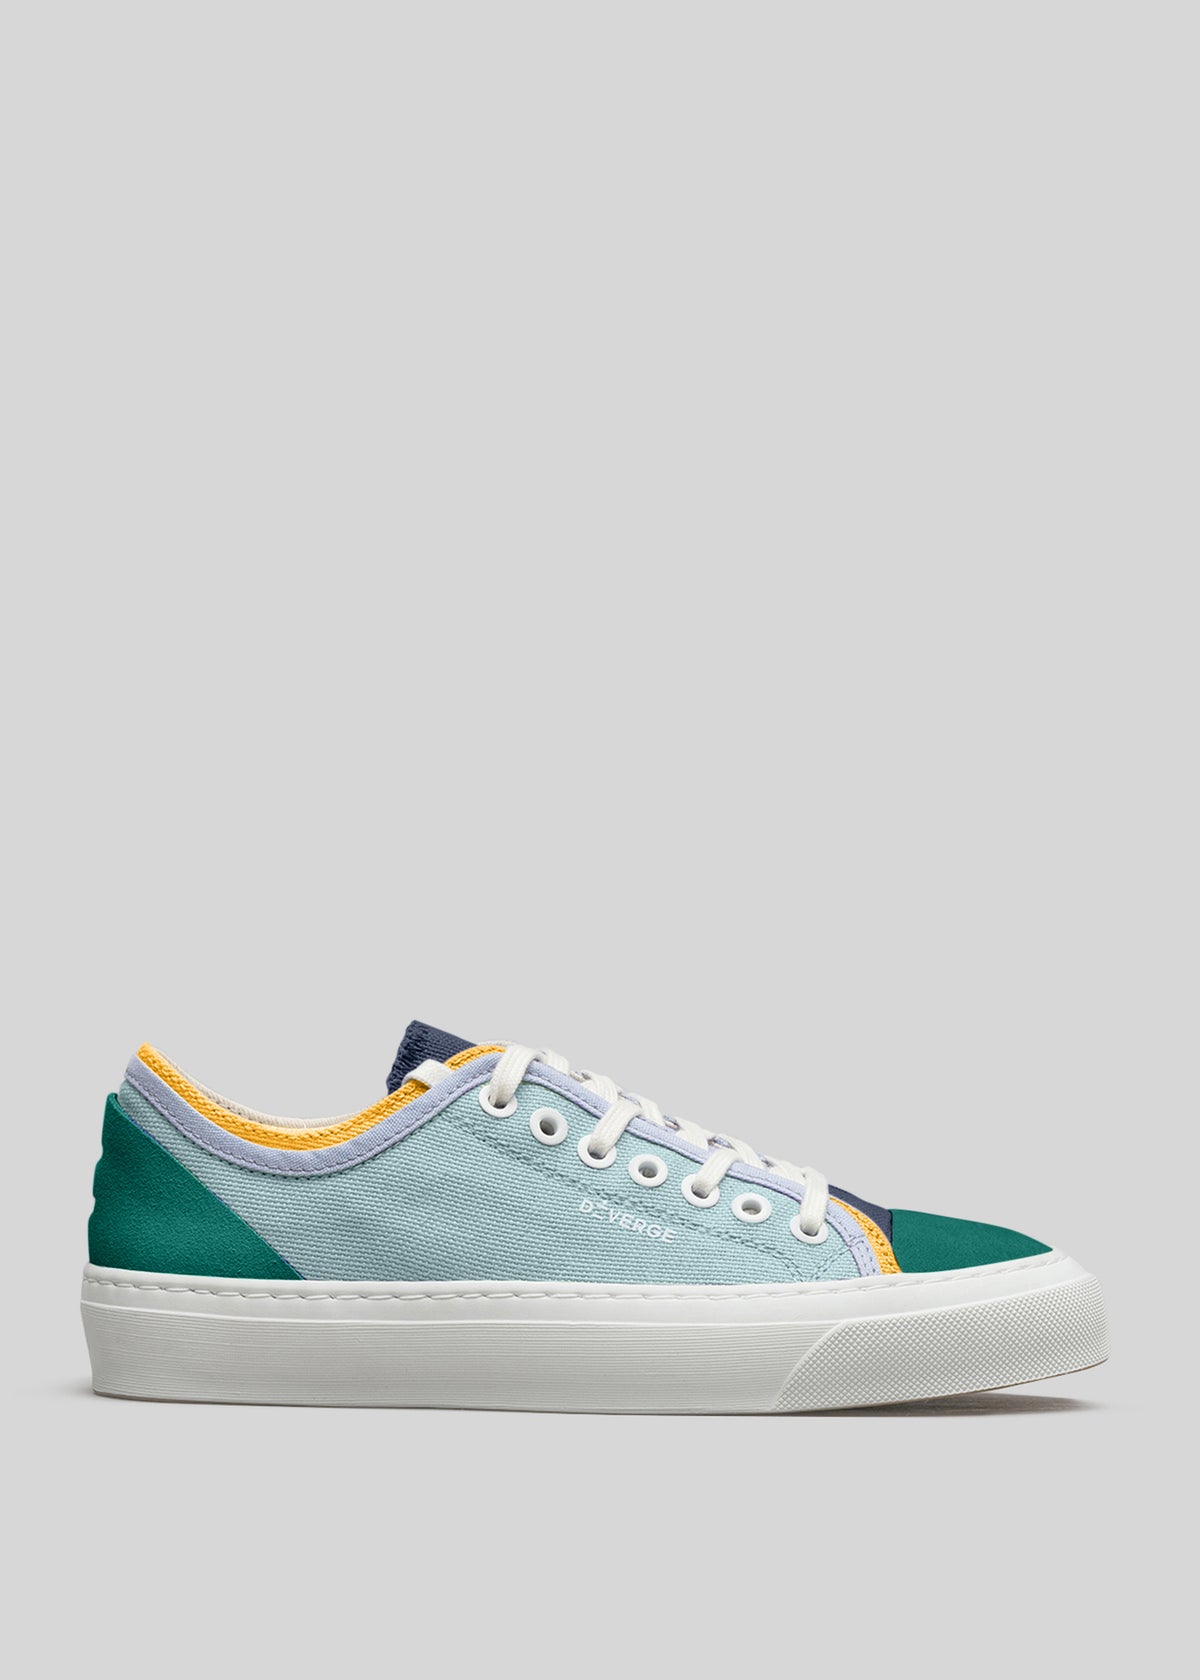 A single TL0004 by Ana with a gradient design transitioning from light blue at the toe to dark green at the heel, featuring white laces and a white sole.